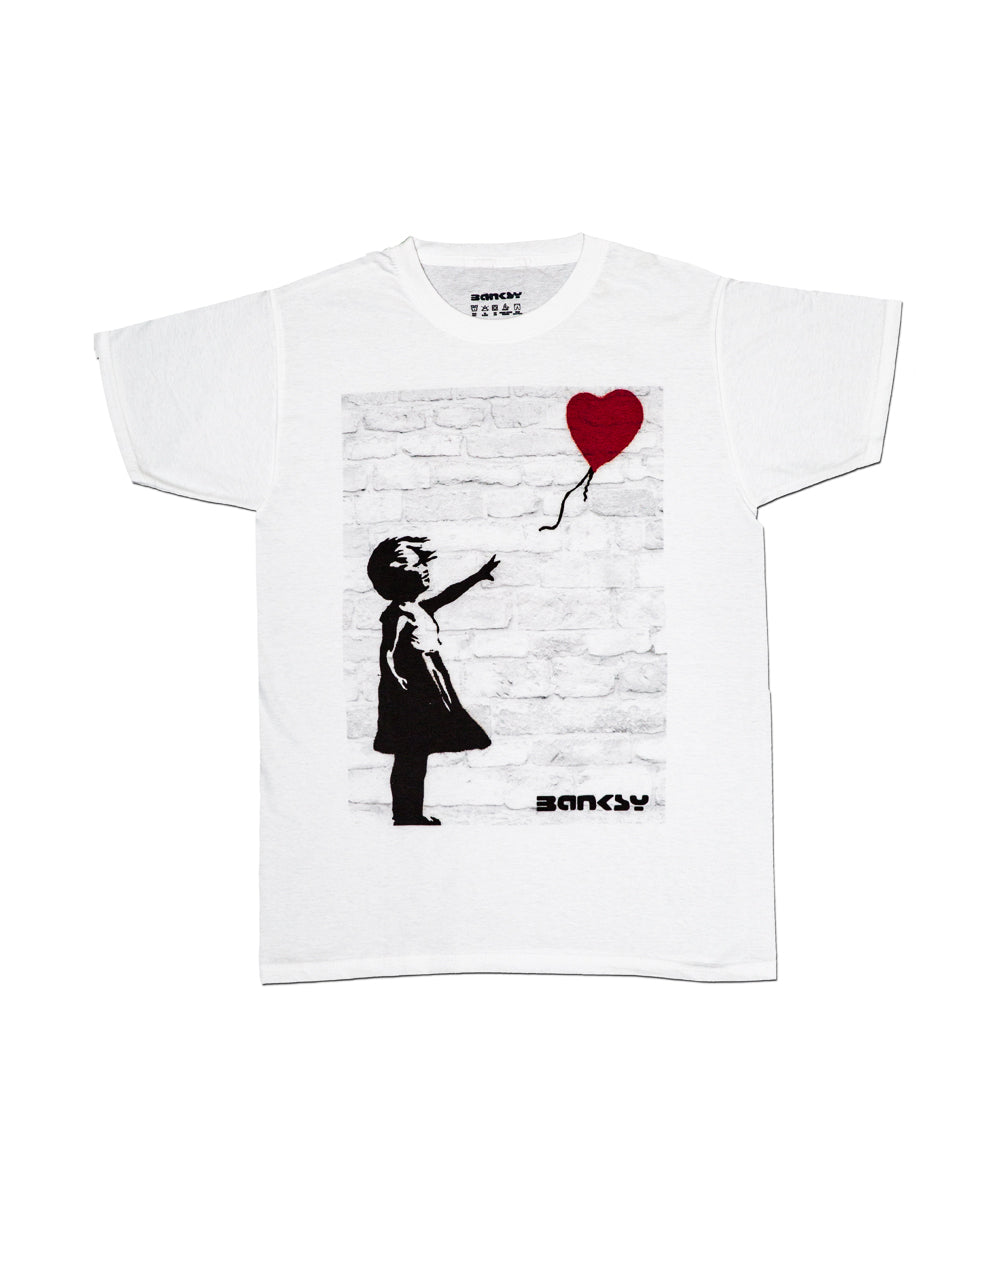 Banksy: Girl with Balloon poster t-shirt